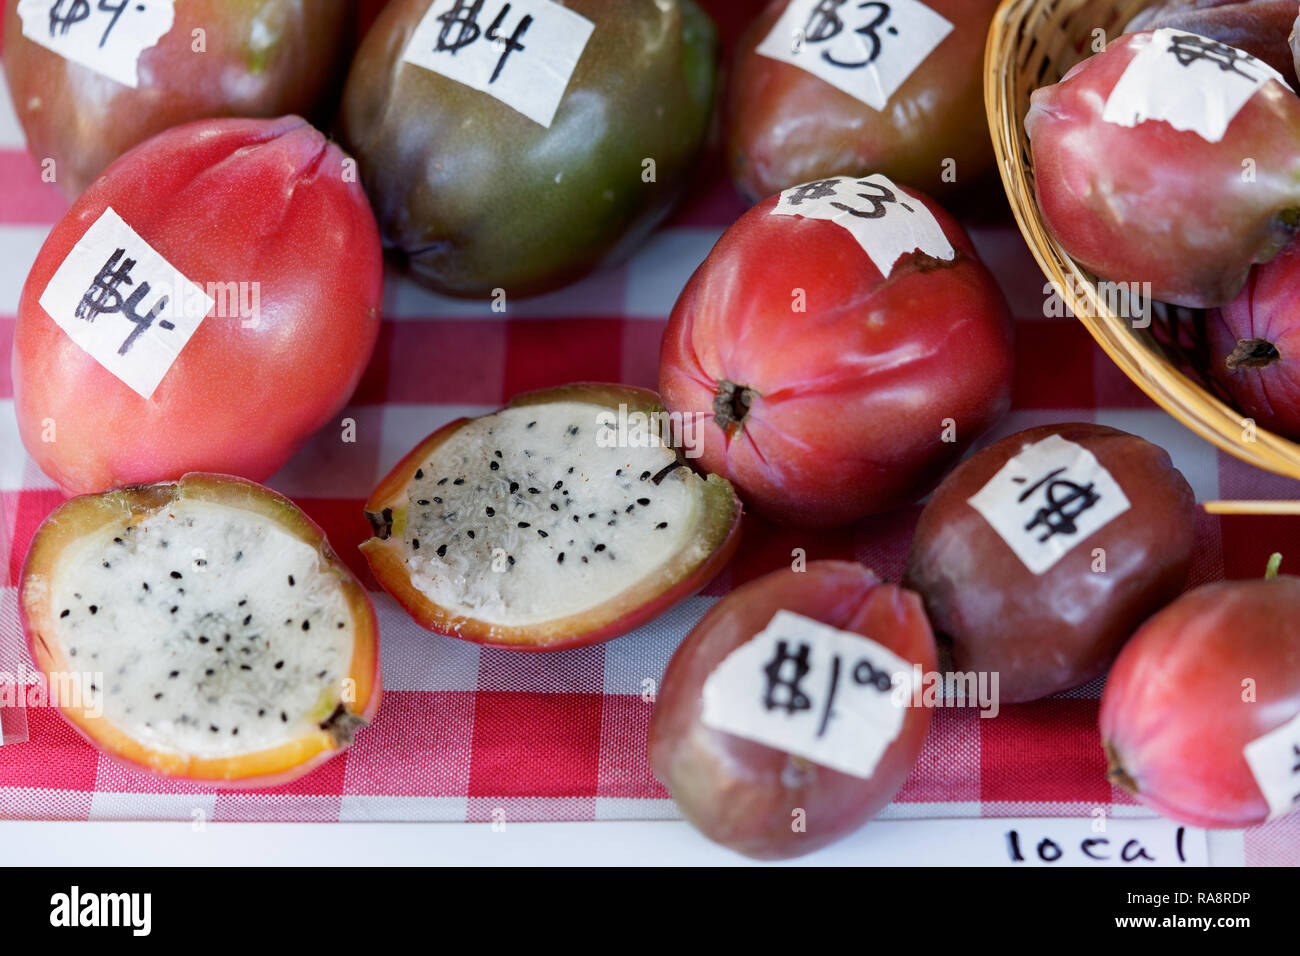 peruvuan cactus apples for sale on a table with a red and white checkered tablecloth at the market with price tags on the fruit Stock Photo